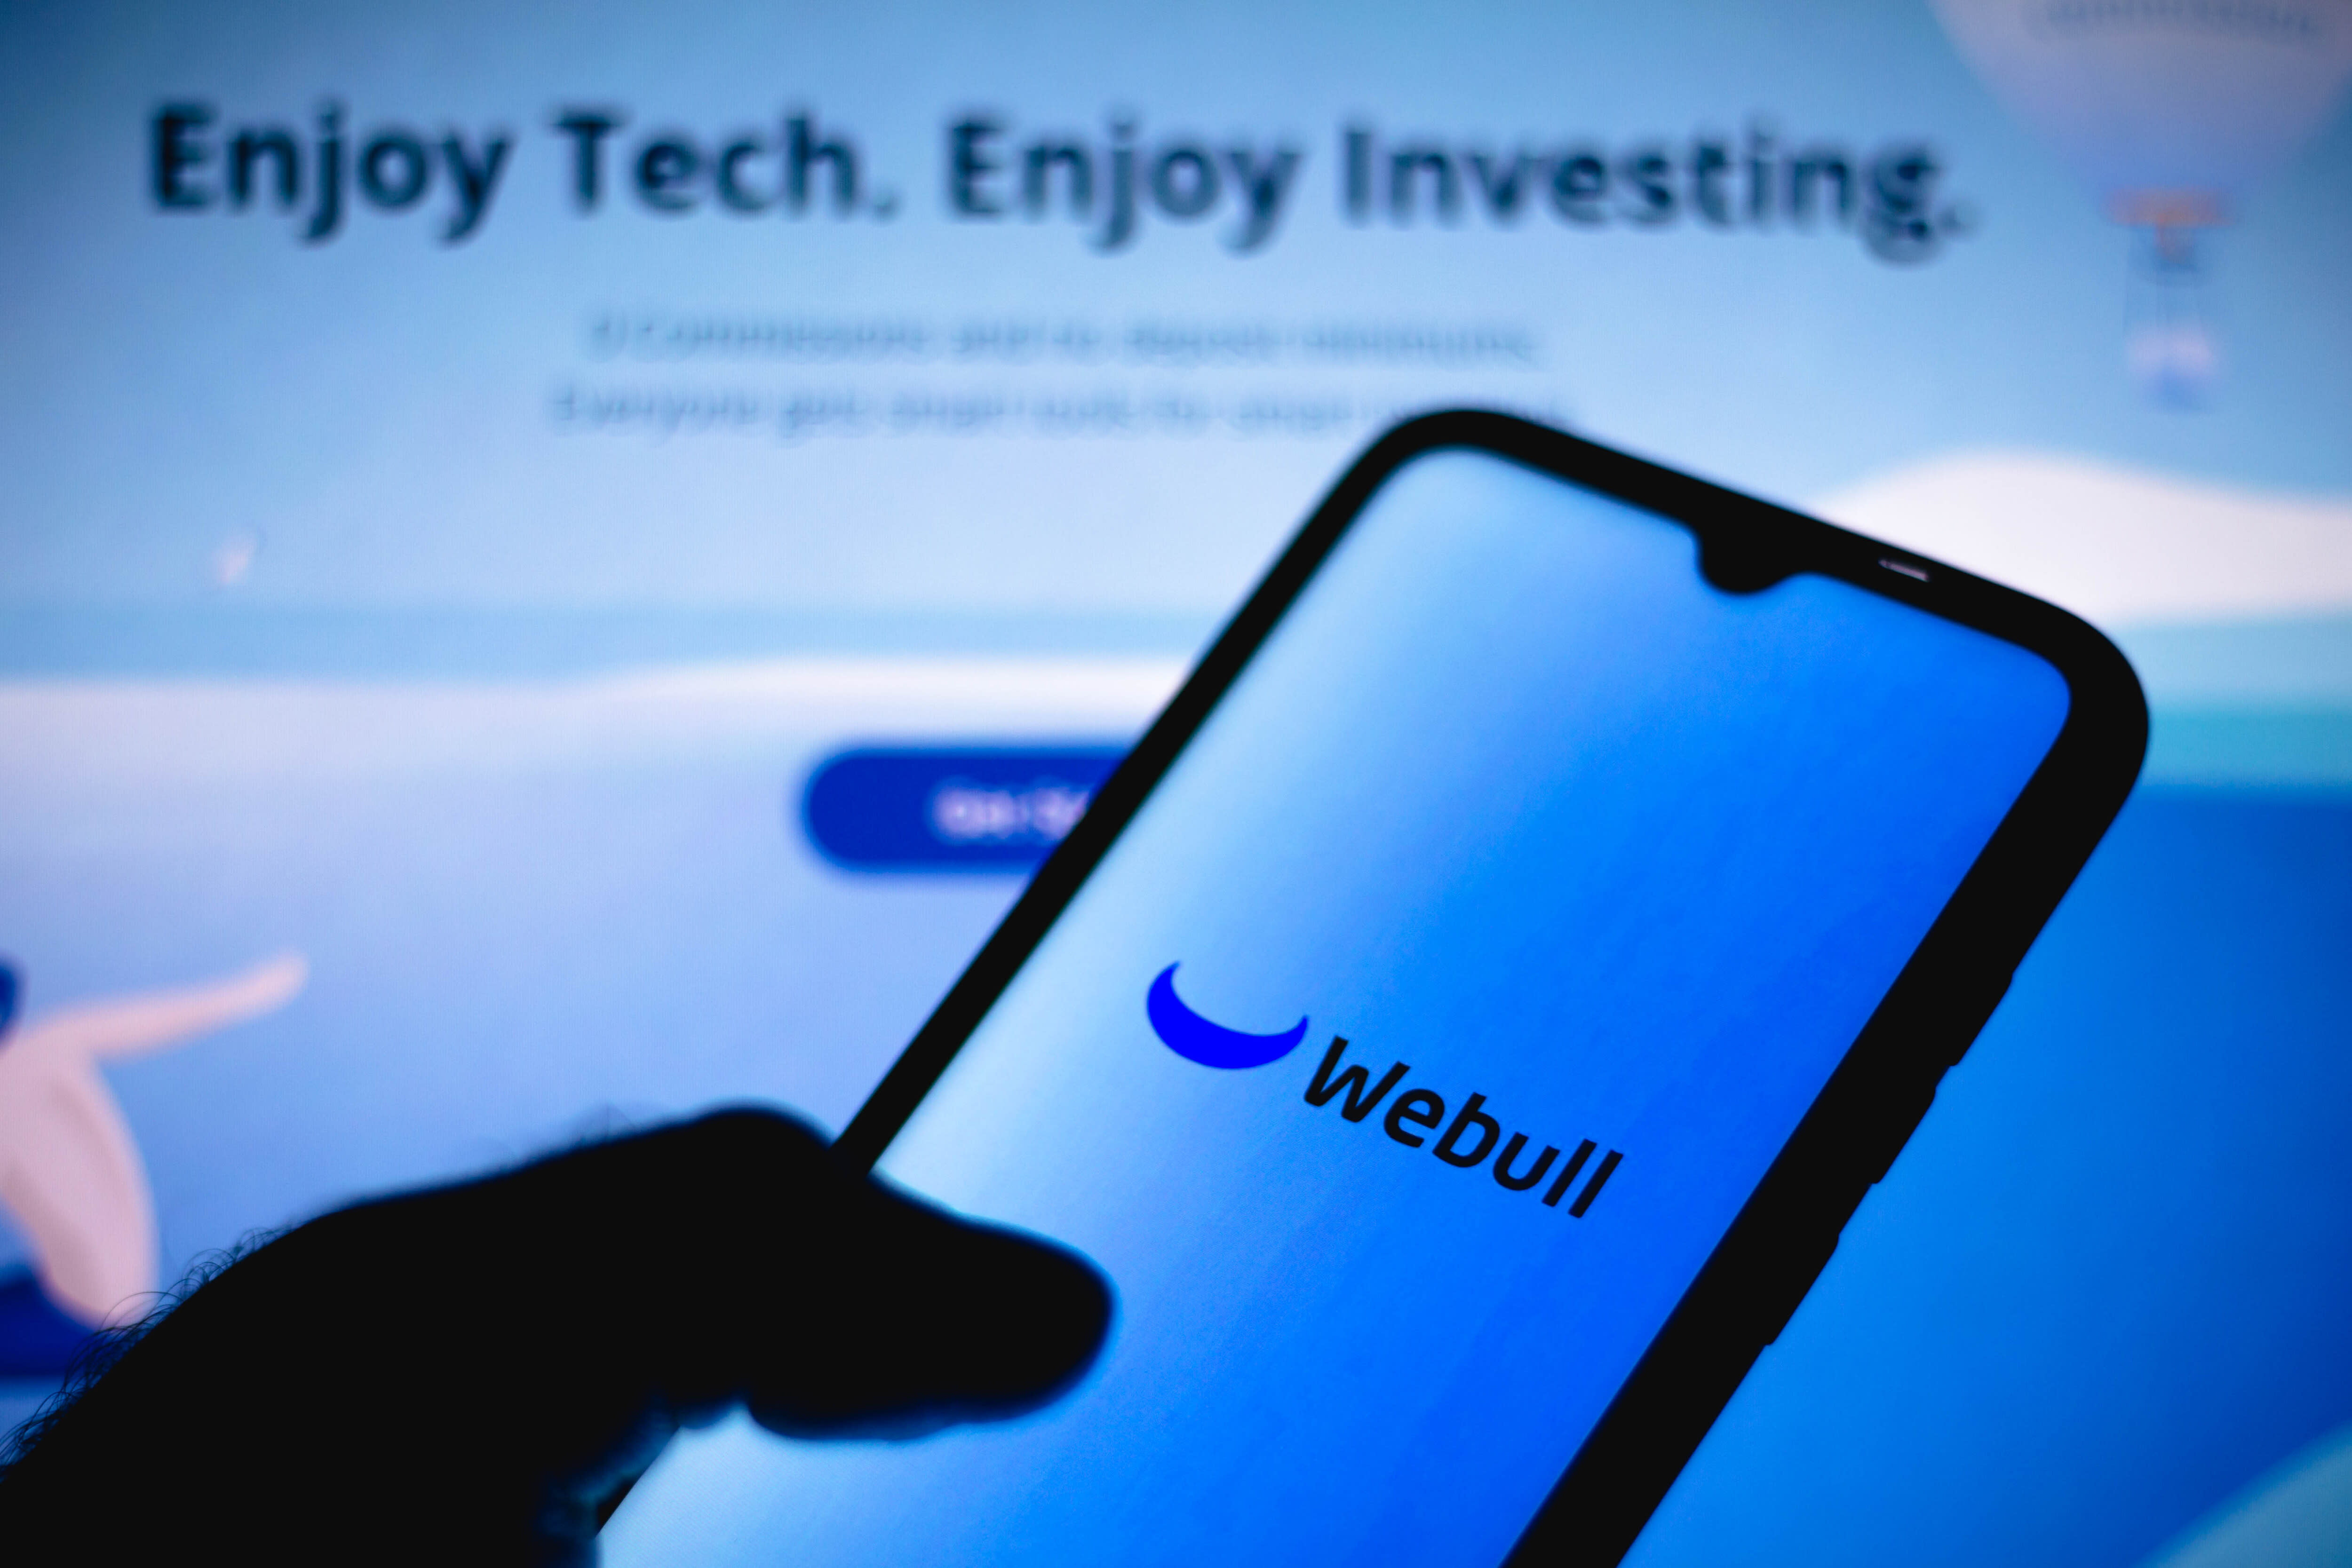 Webull CEO on what factors differentiate his trading platform from Robinhood